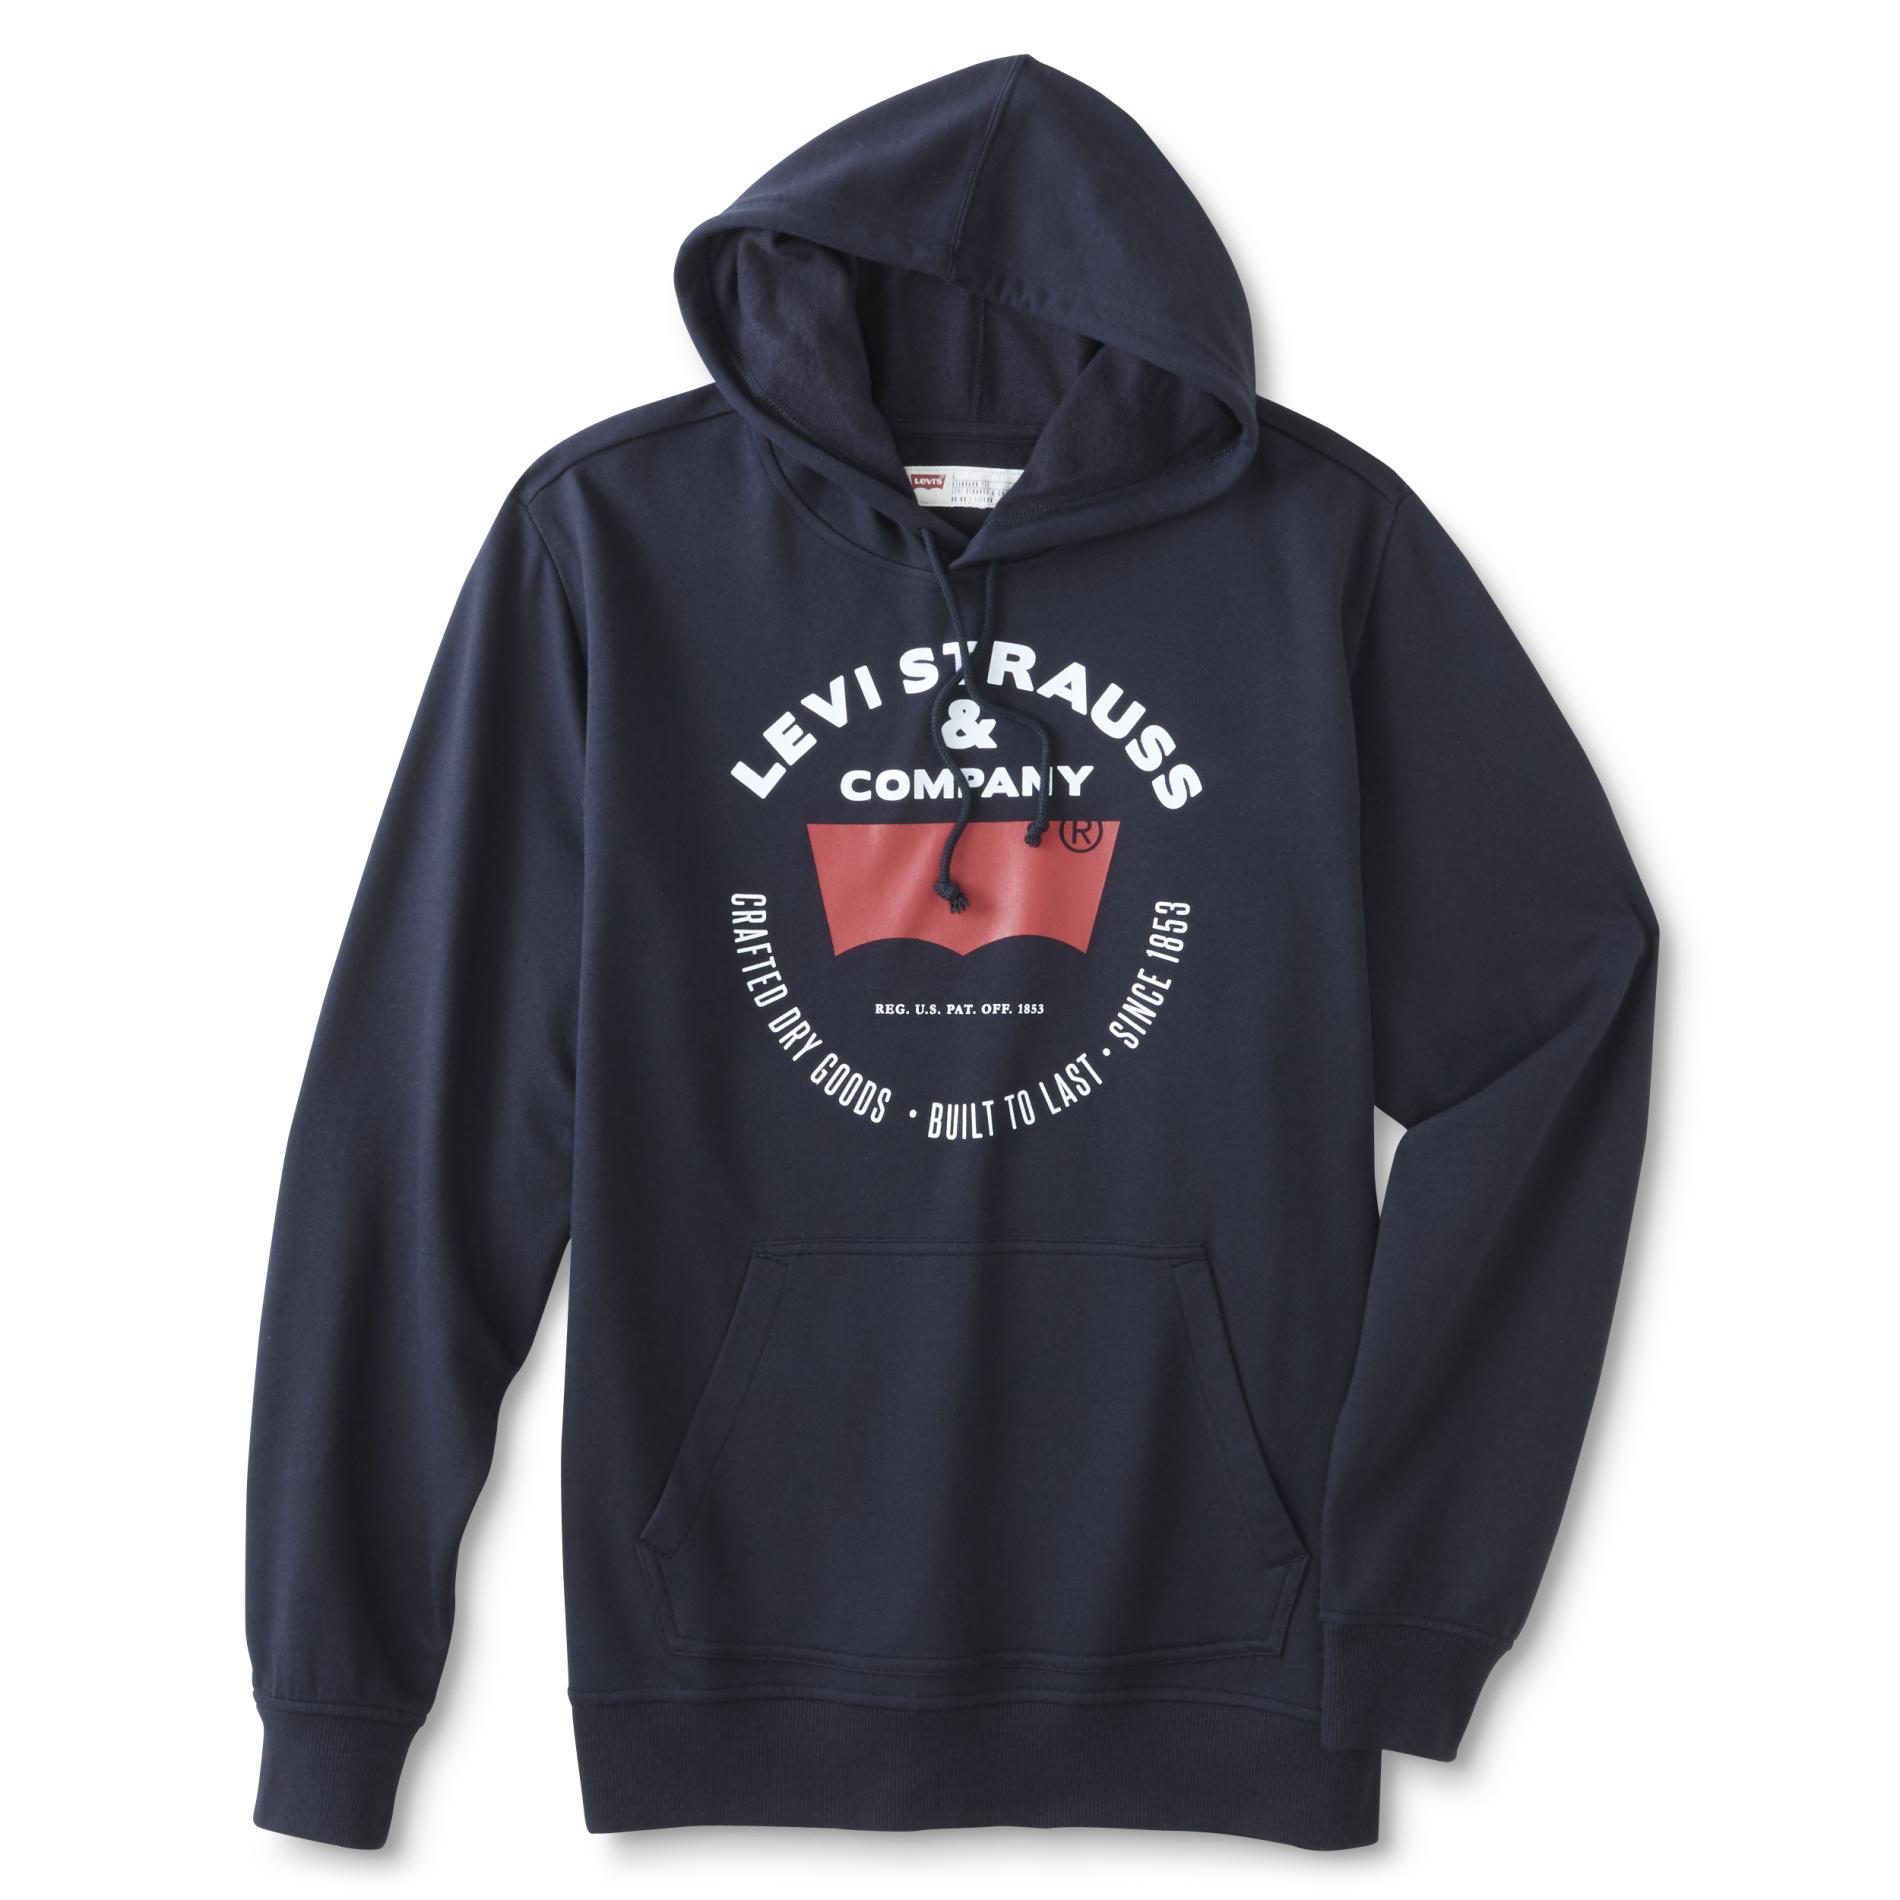 Levi's Young Men's Graphic Hoodie - Logo